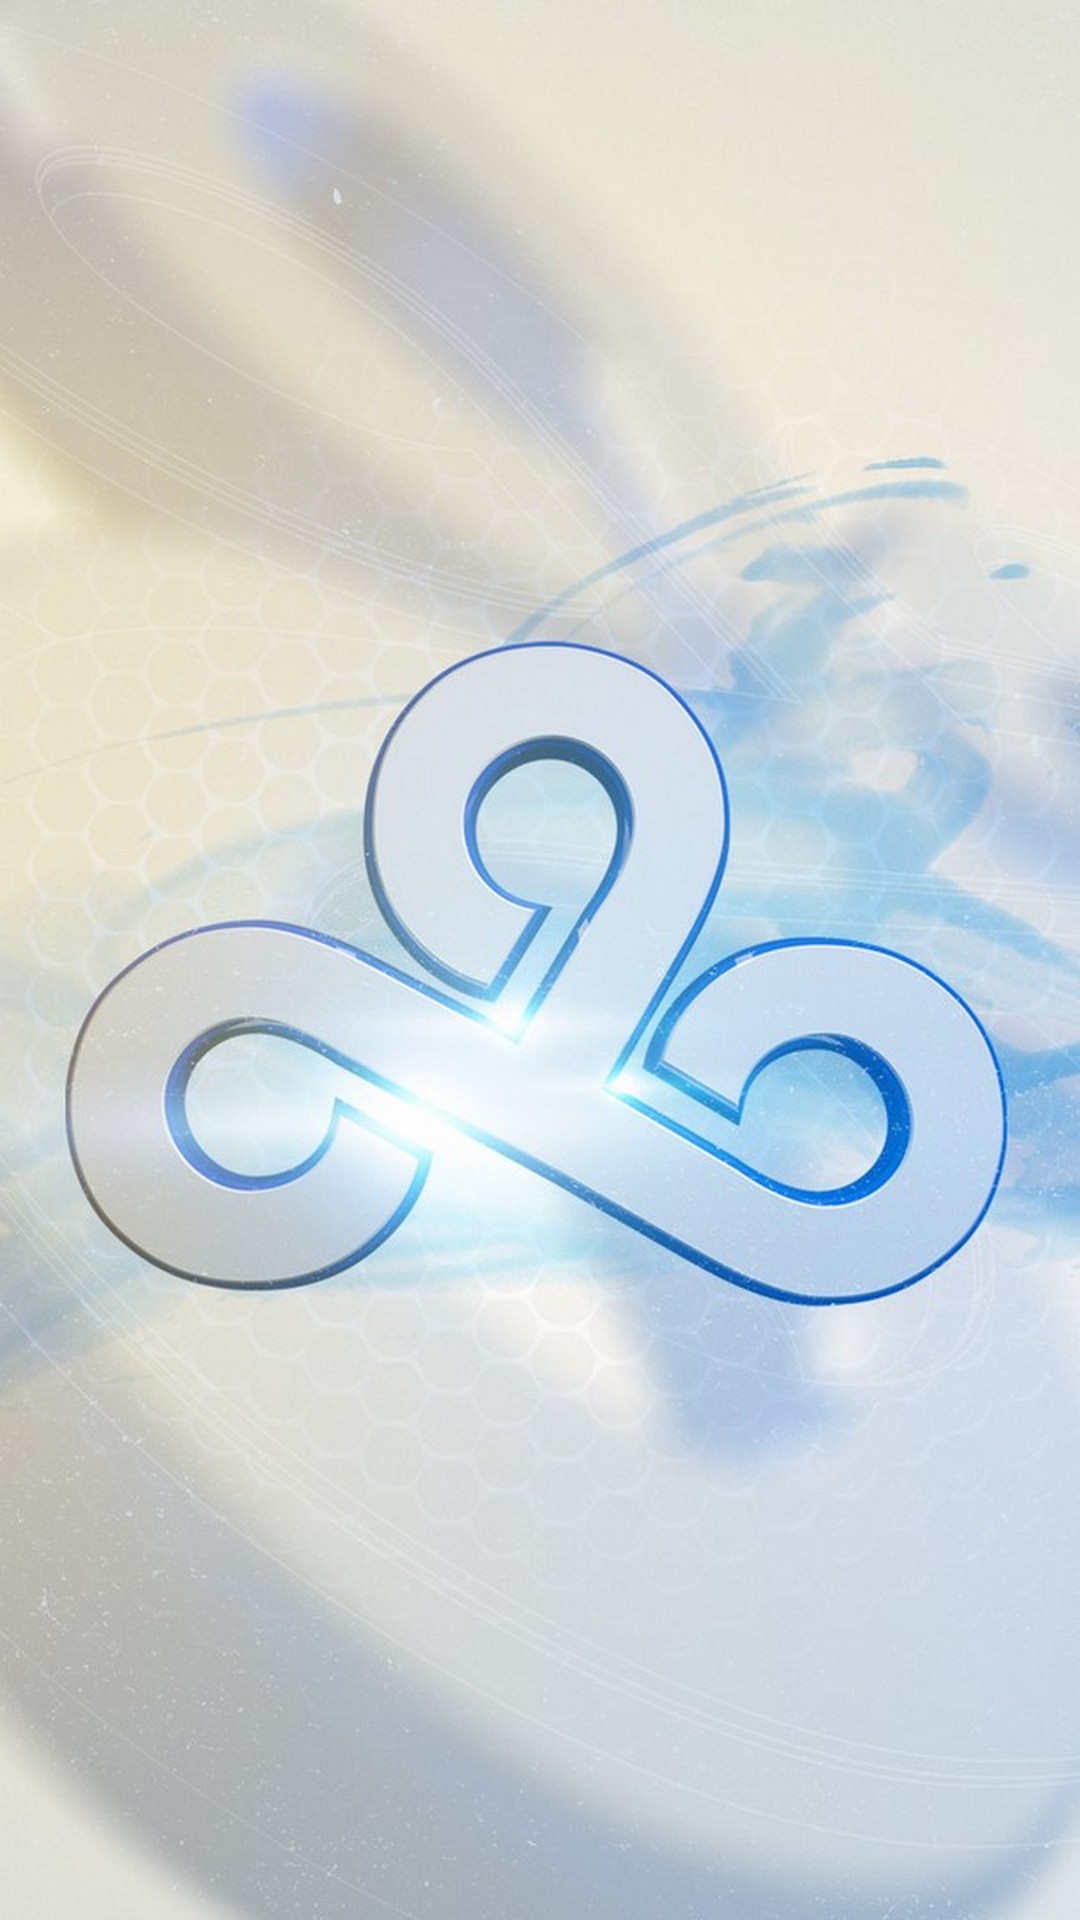 Cloud 9 Wallpaper For iPhone resolution 1080x1920